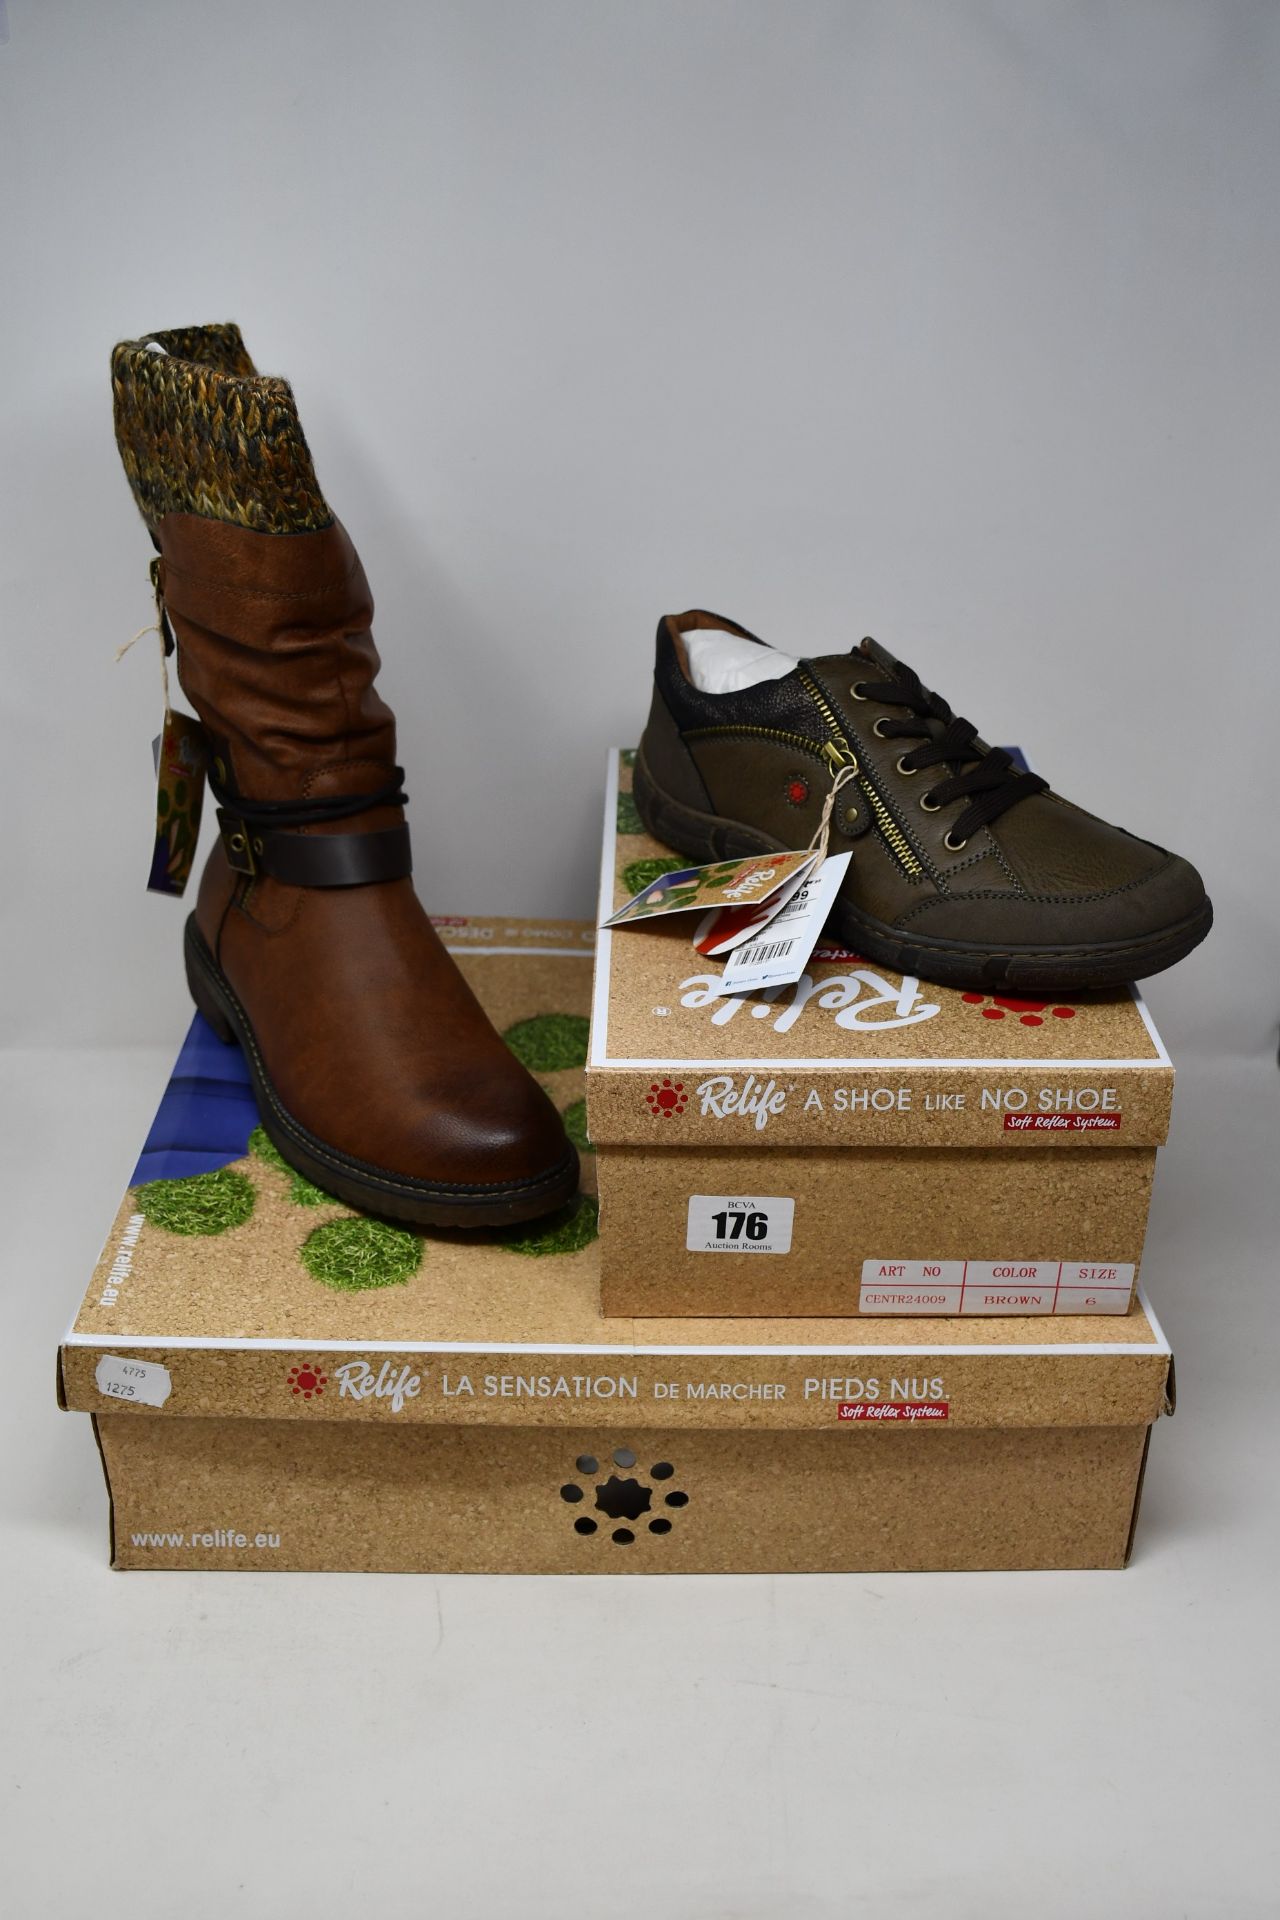 Two pairs of as new Relife 24009 shoes (Size 6 - RRP £40 each) and a pair of Relife 32069 boots (